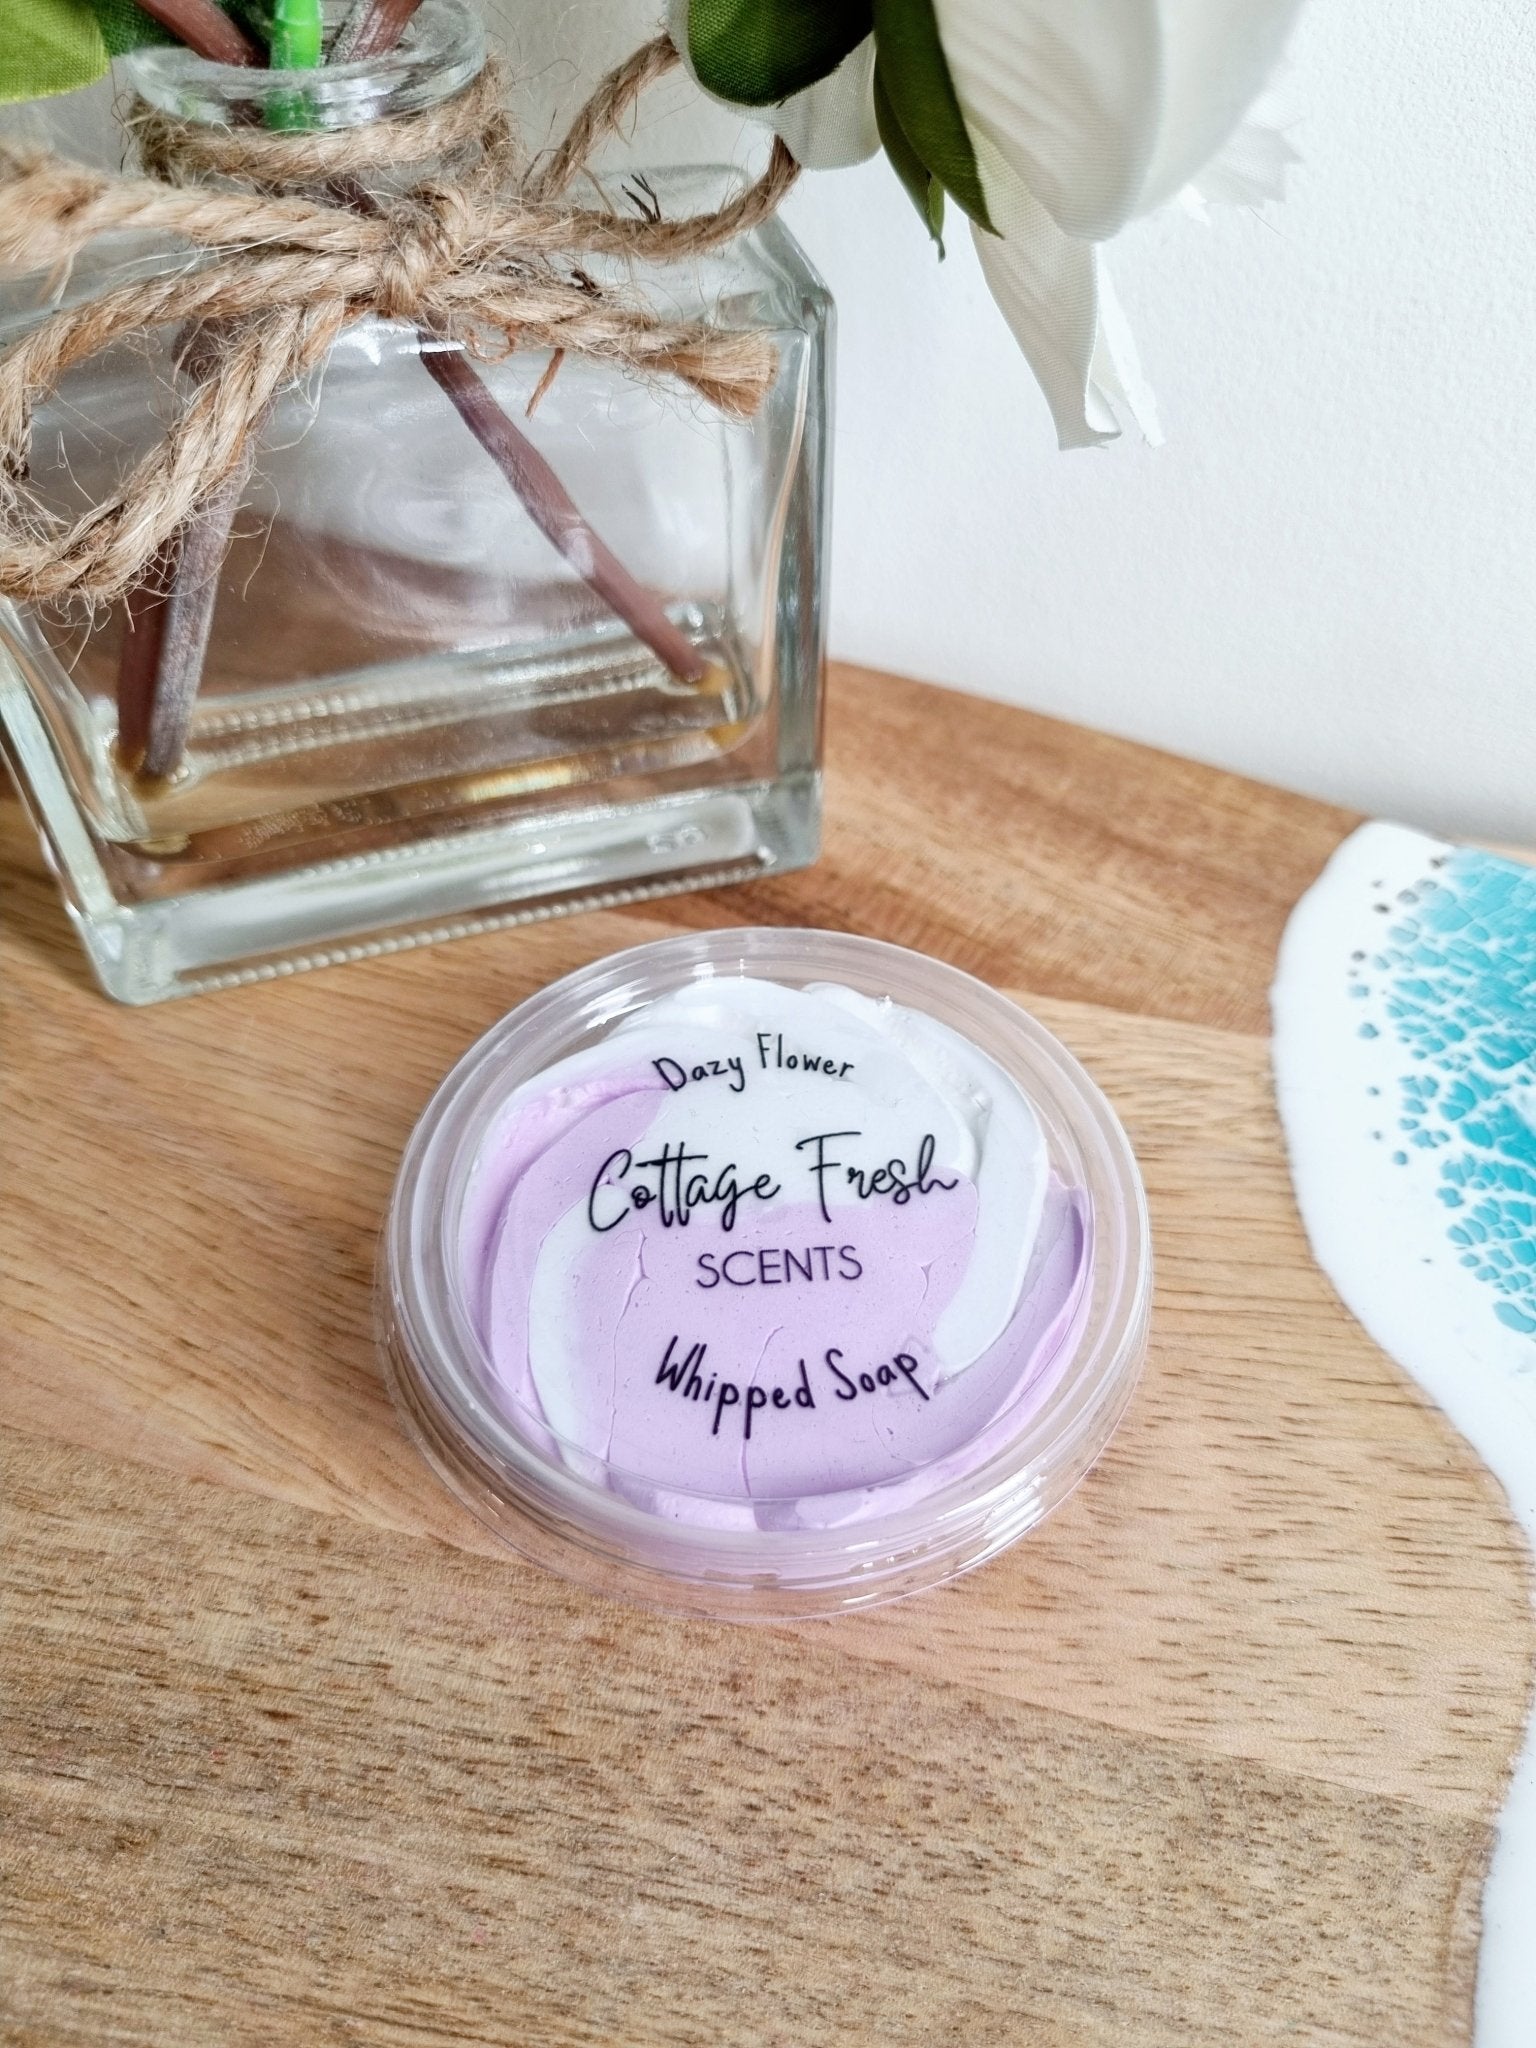 Dazy Flower Whipped Soap - Whipped Soap - Cottage Fresh Scents